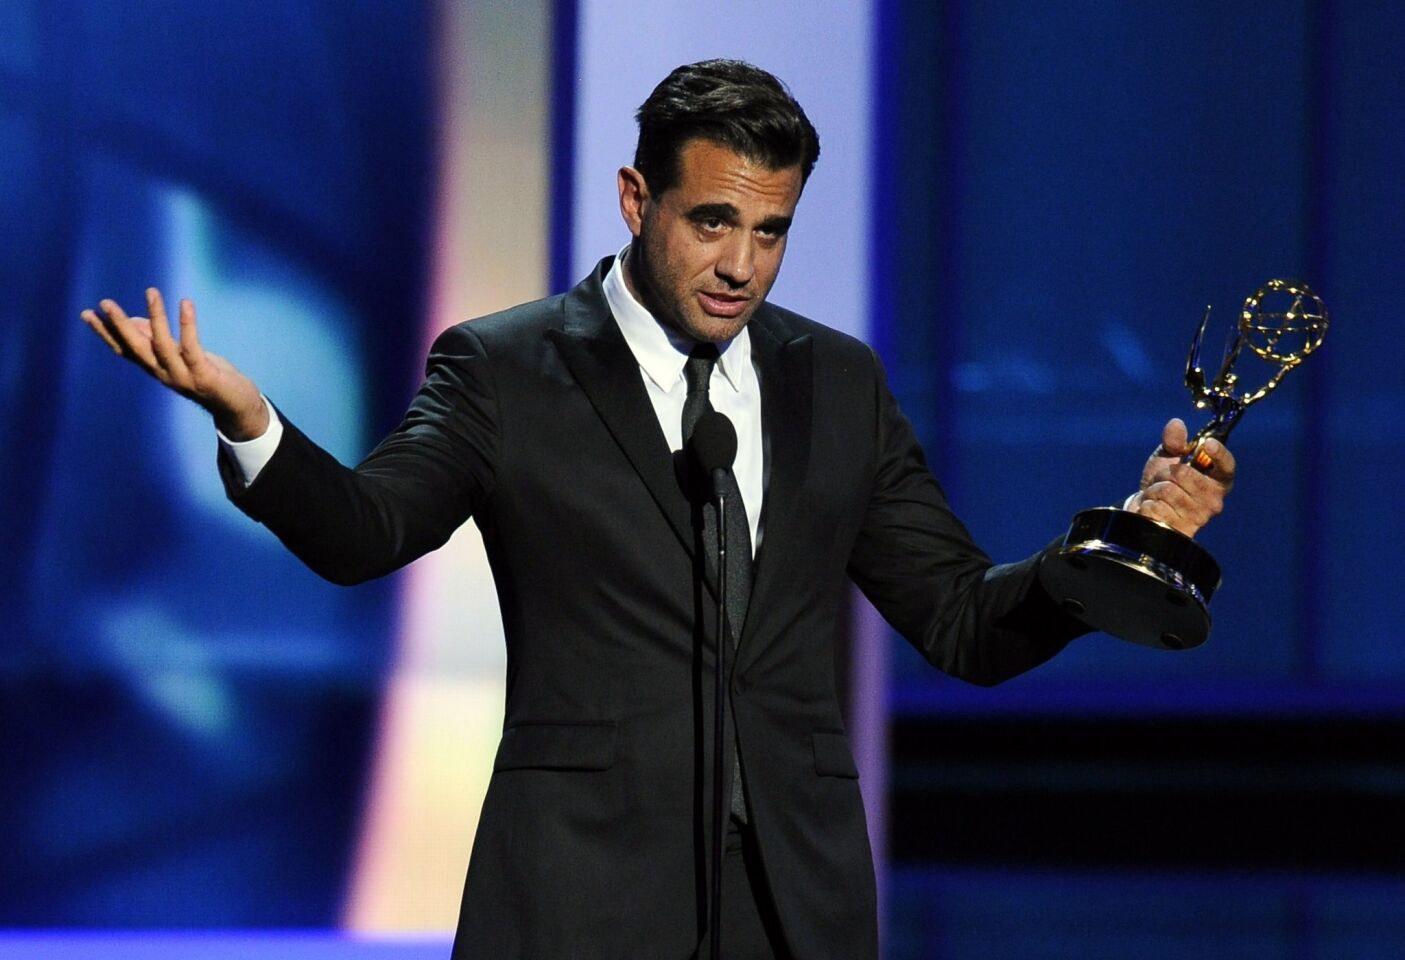 Bobby Cannavale was up against Mandy Patinkin, Aaron Paul and other great actors for the supporting actor in a drama series. But Cannavale was the surprise winner for "Boardwalk Empire." His gushing, astonished, self-effacing speech was better than the usual canned emotion given out by long-expected winners.